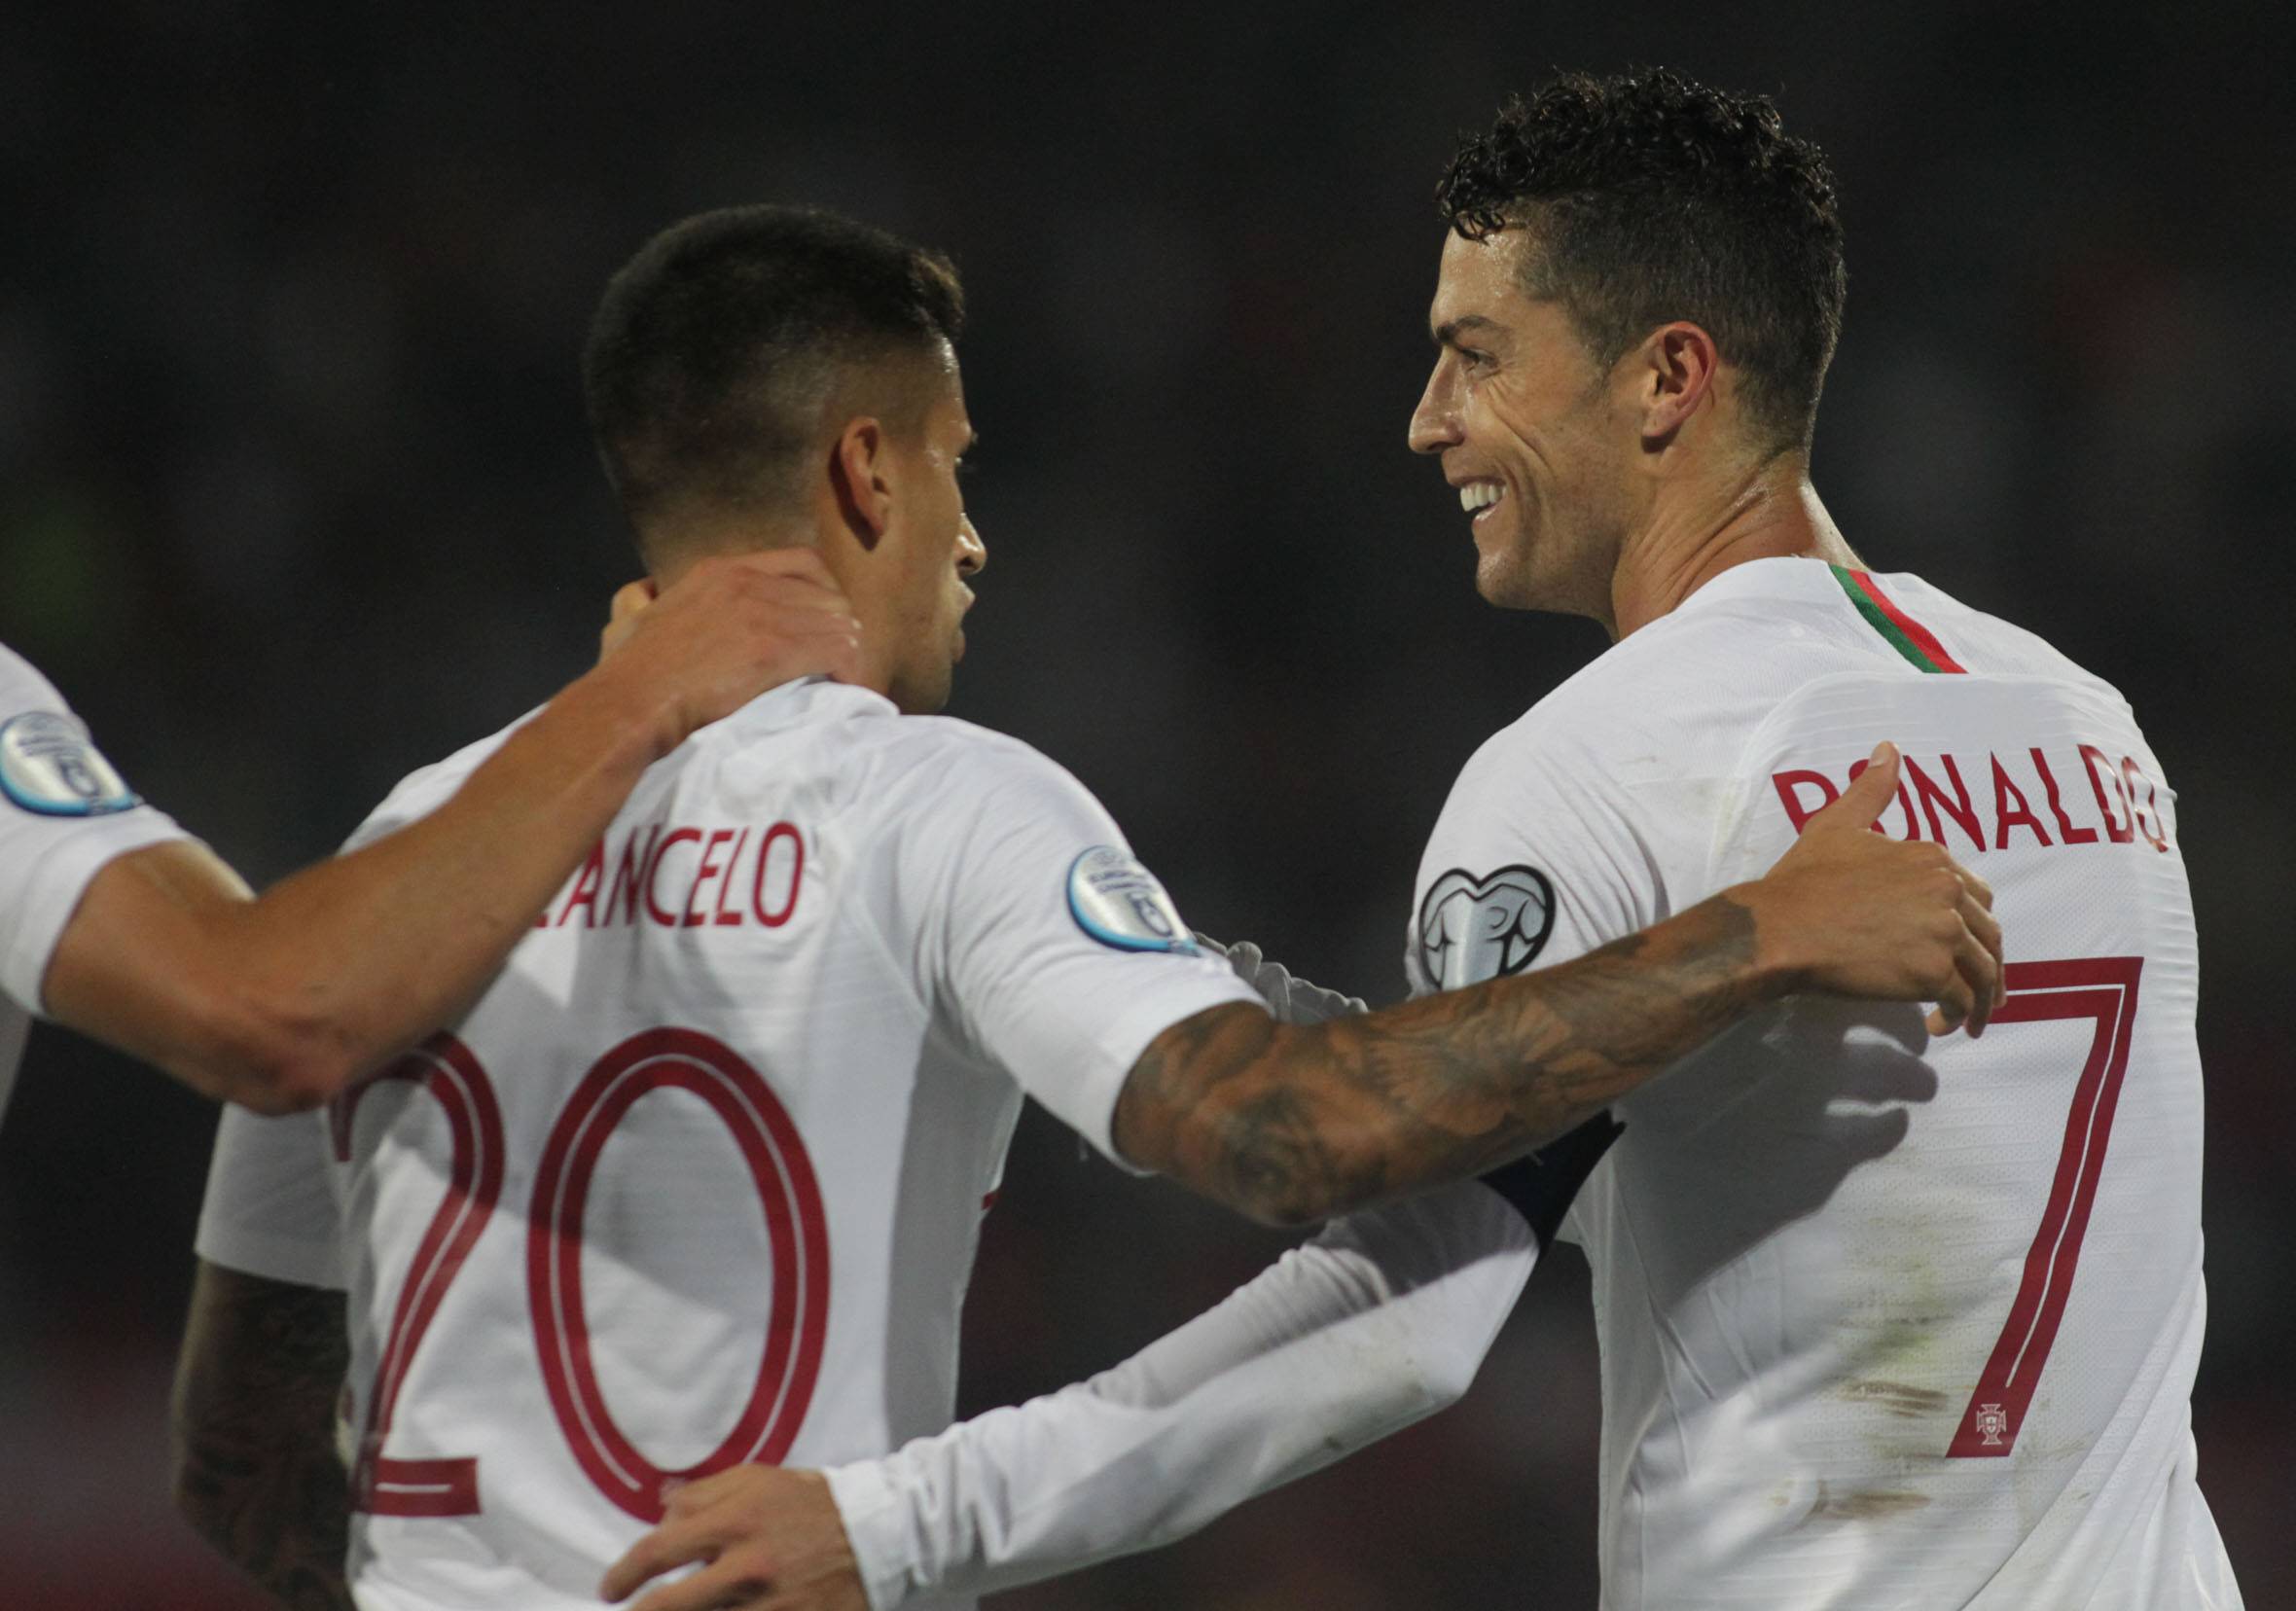 Joao Cancelo (left) and Cristiano Ronaldo pictured during Portugal's 4-2 win over Serbia in September 2019